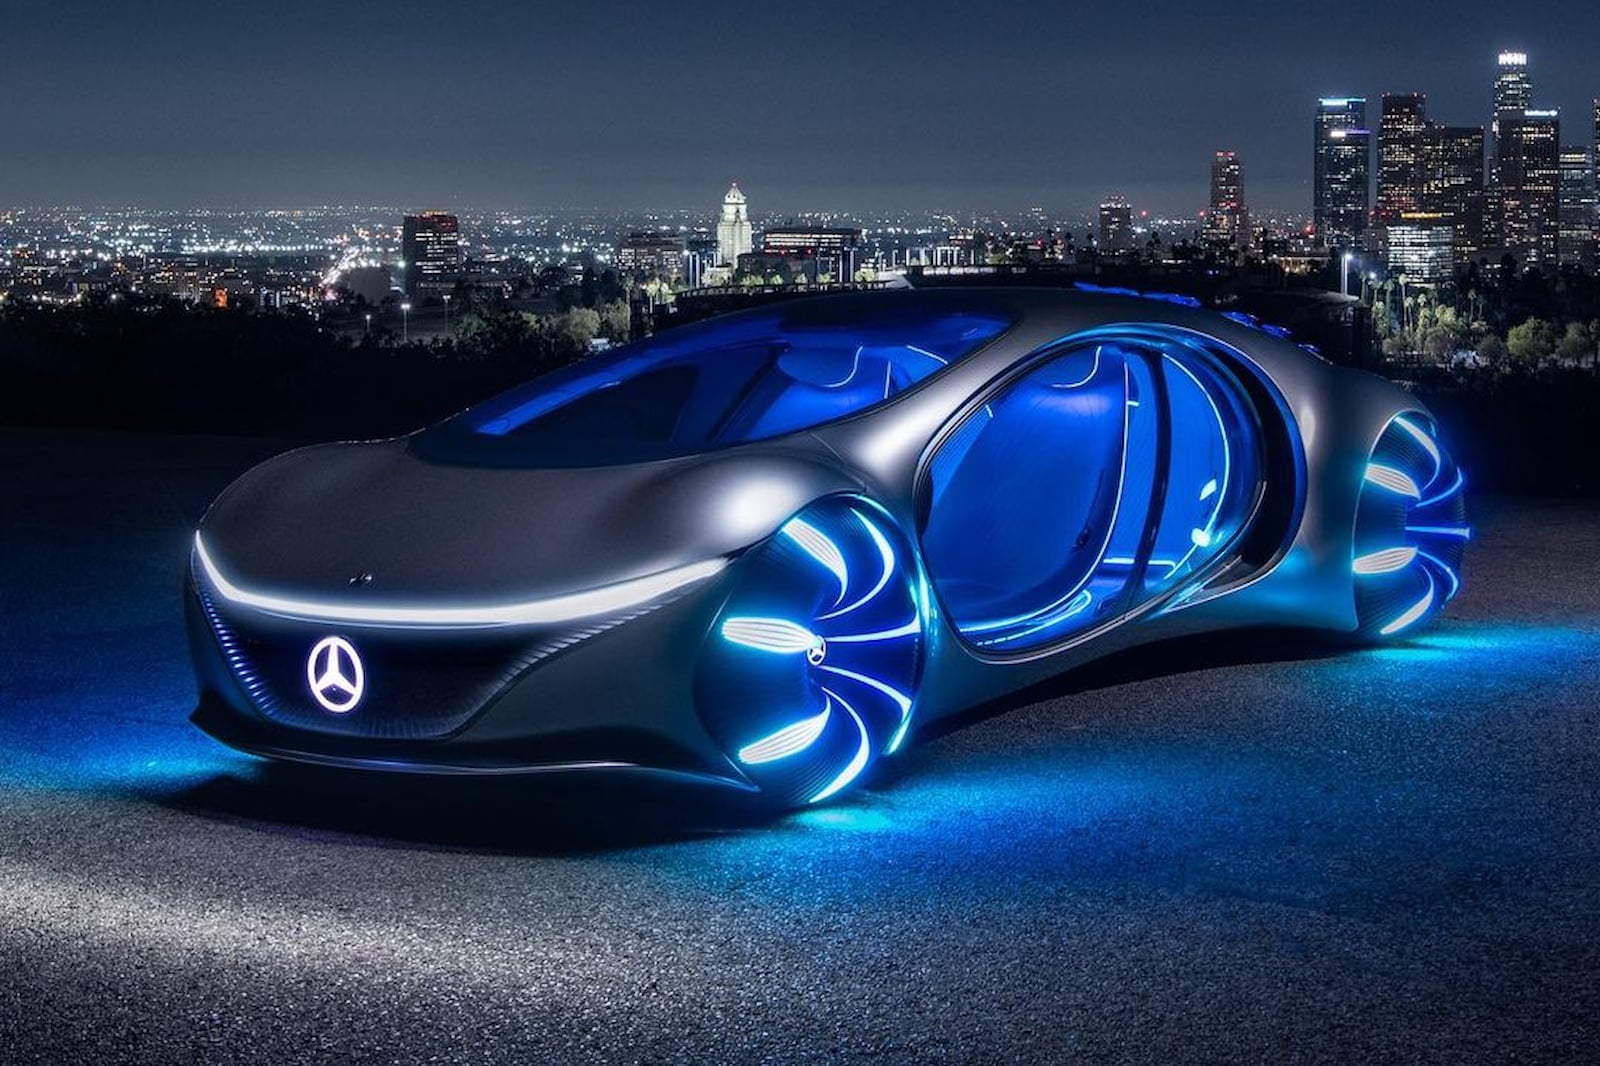 Spectacular Mercedes Vision AVTR Concept Car Takes To LA Streets For Avatar Film Premiere